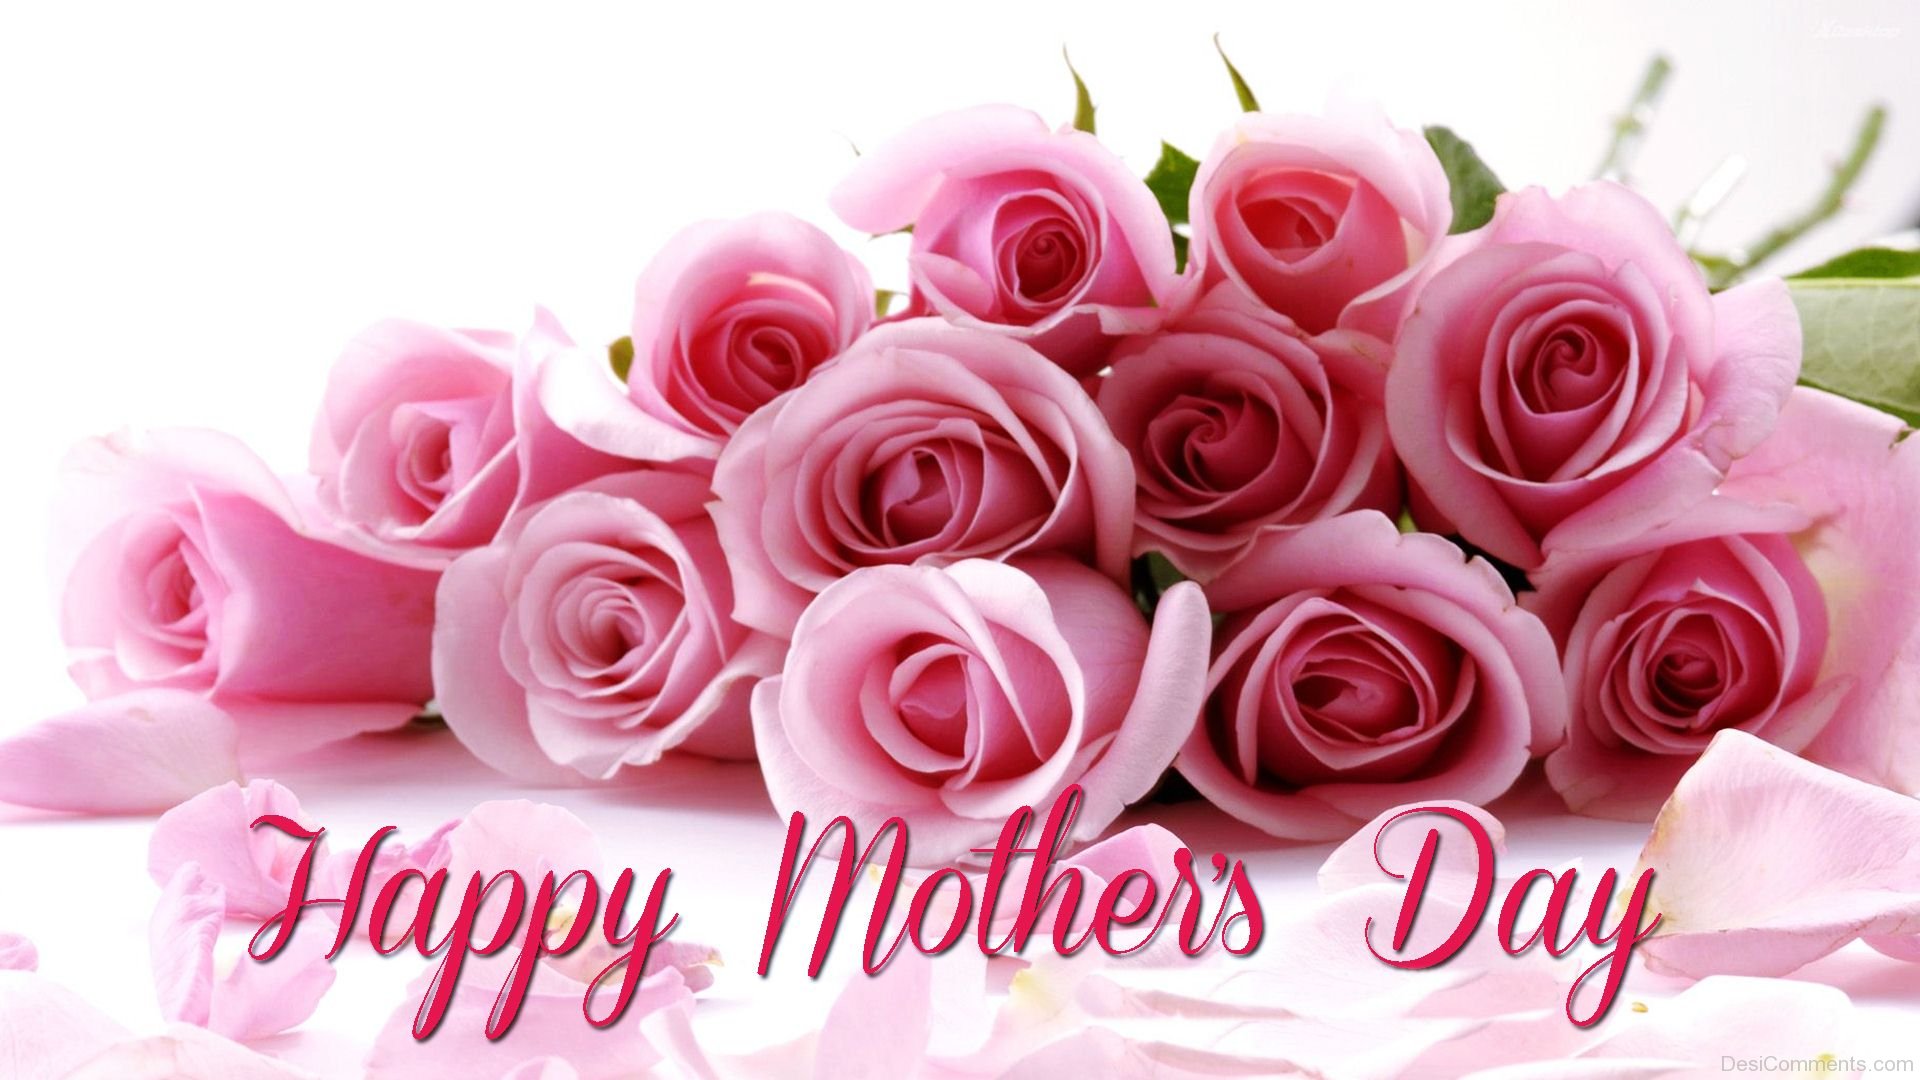 Mothers Day 2017 Images for Whatsapp